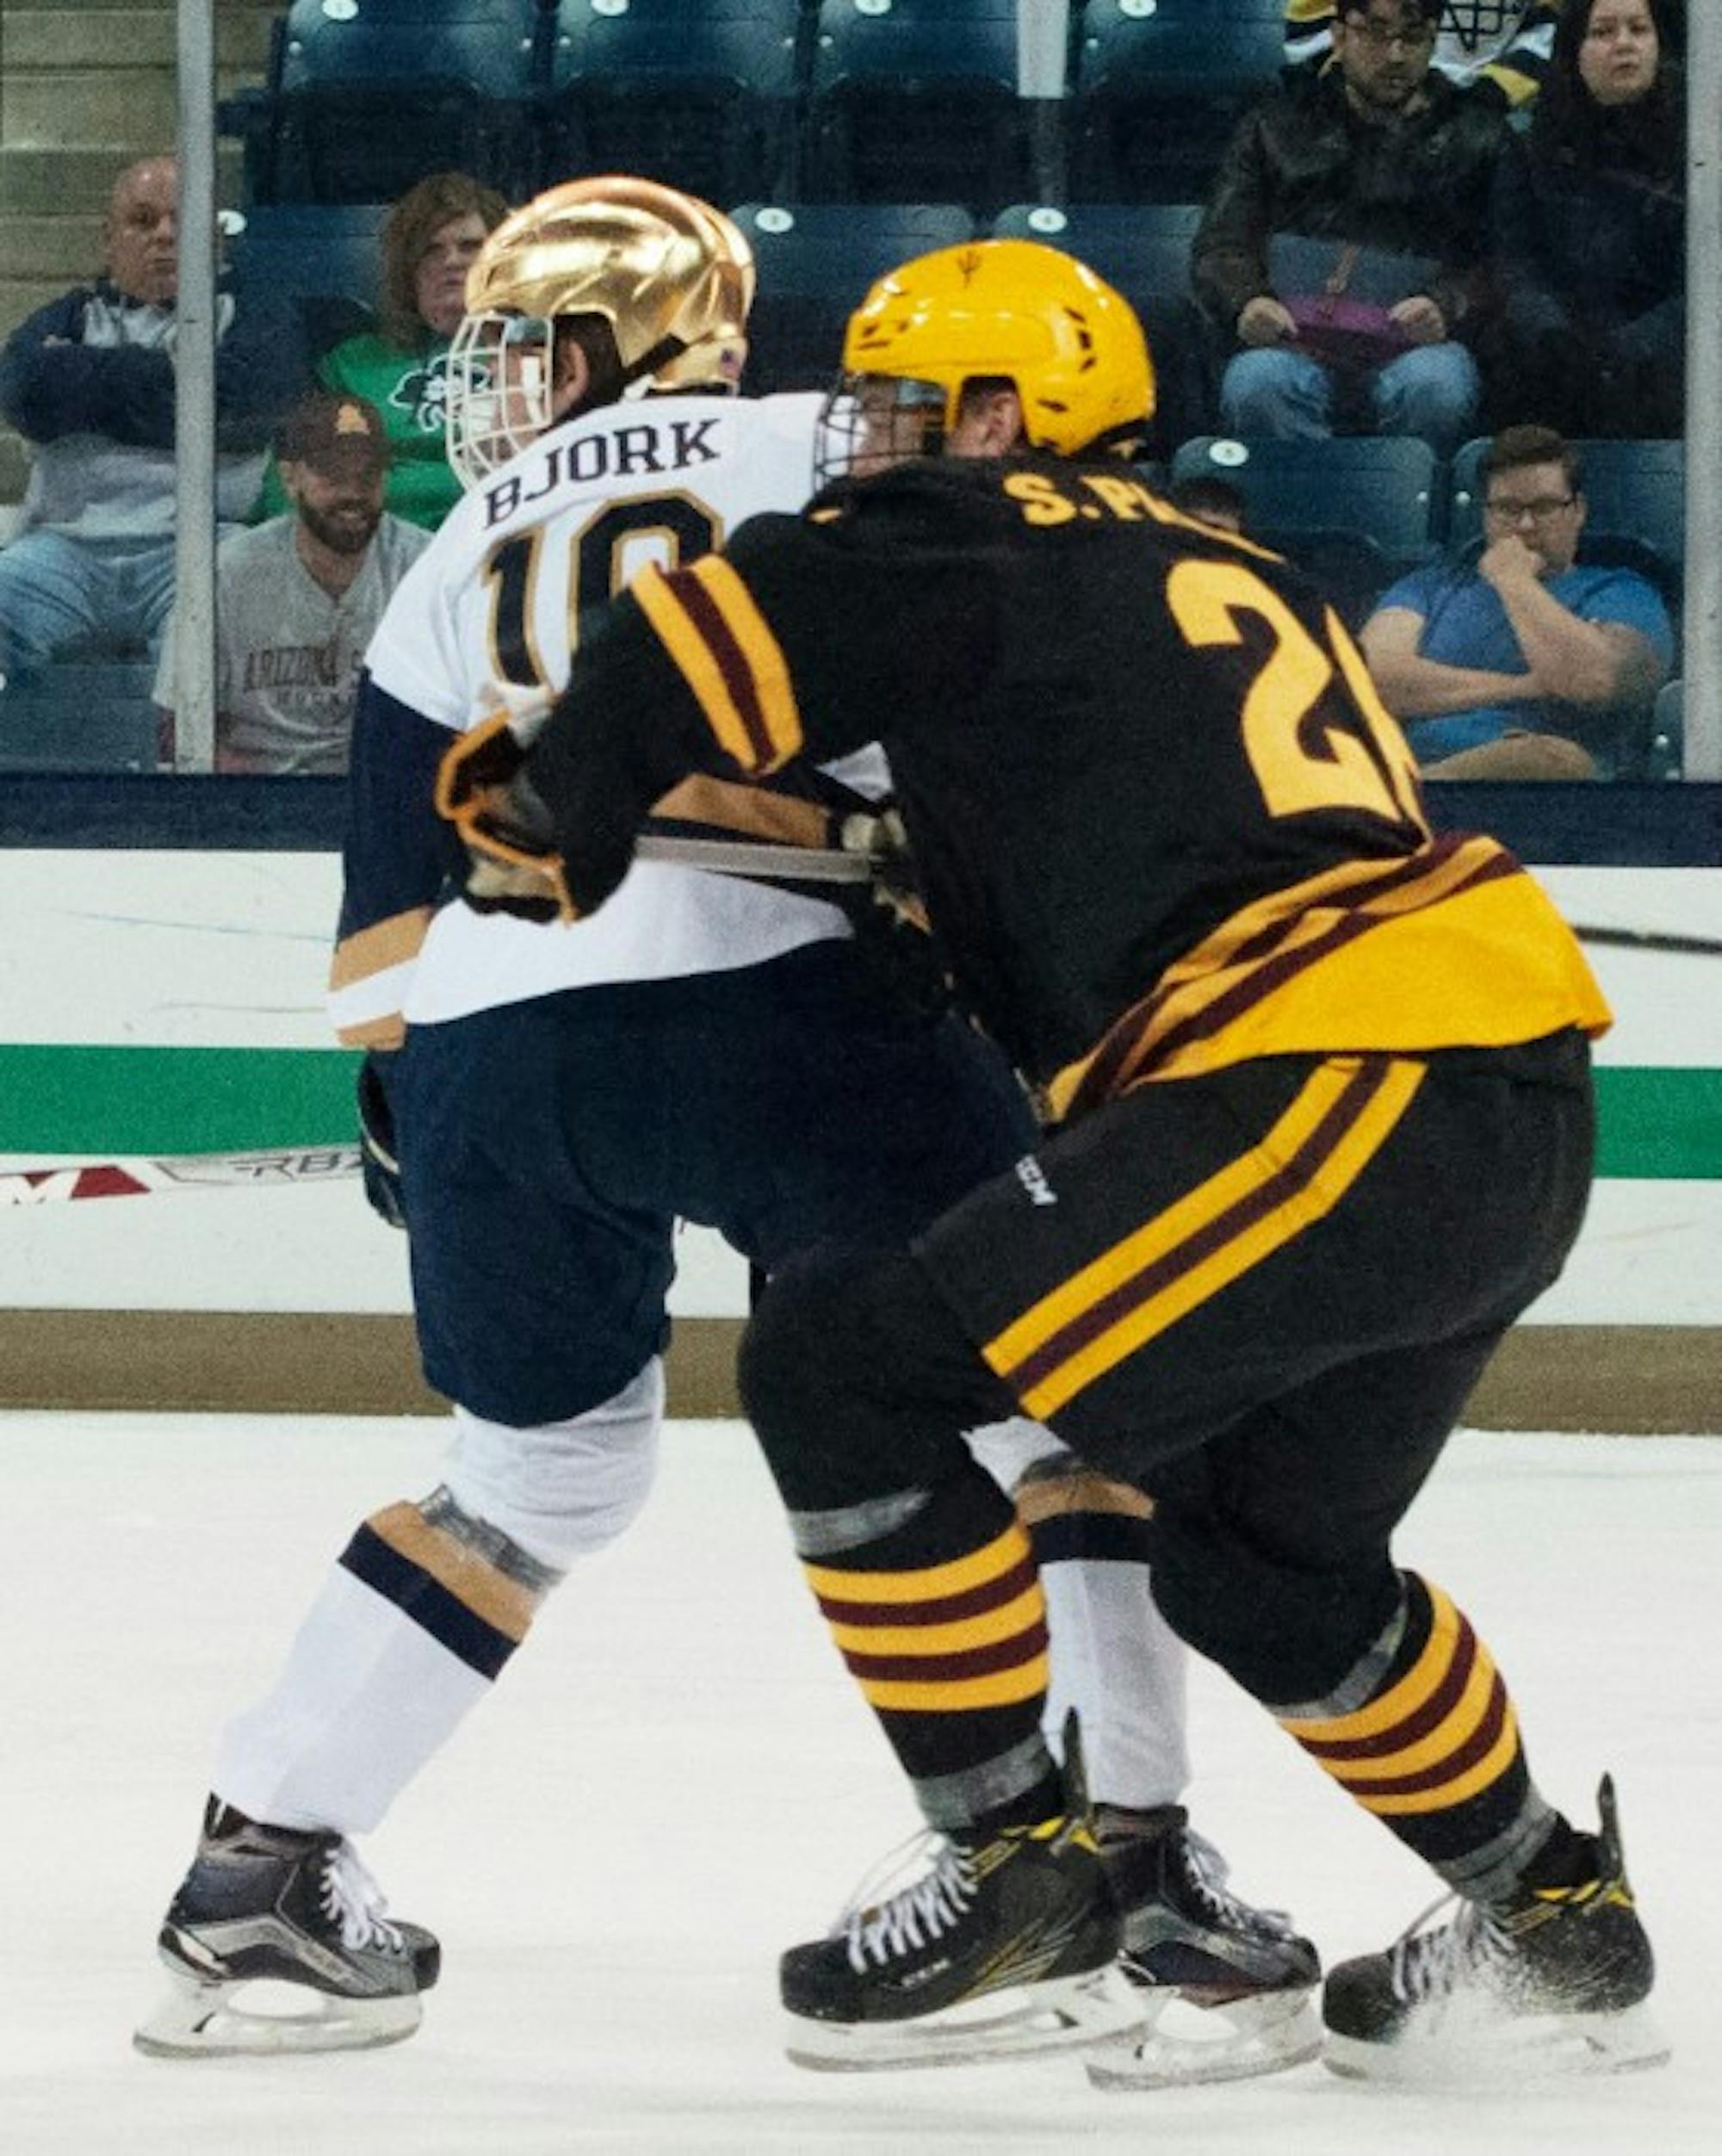 Junior forward Anders Bjork holds off a defender during Notre Dame’s 4-2 win over ASU on Saturday at Compton Family Ice Area.